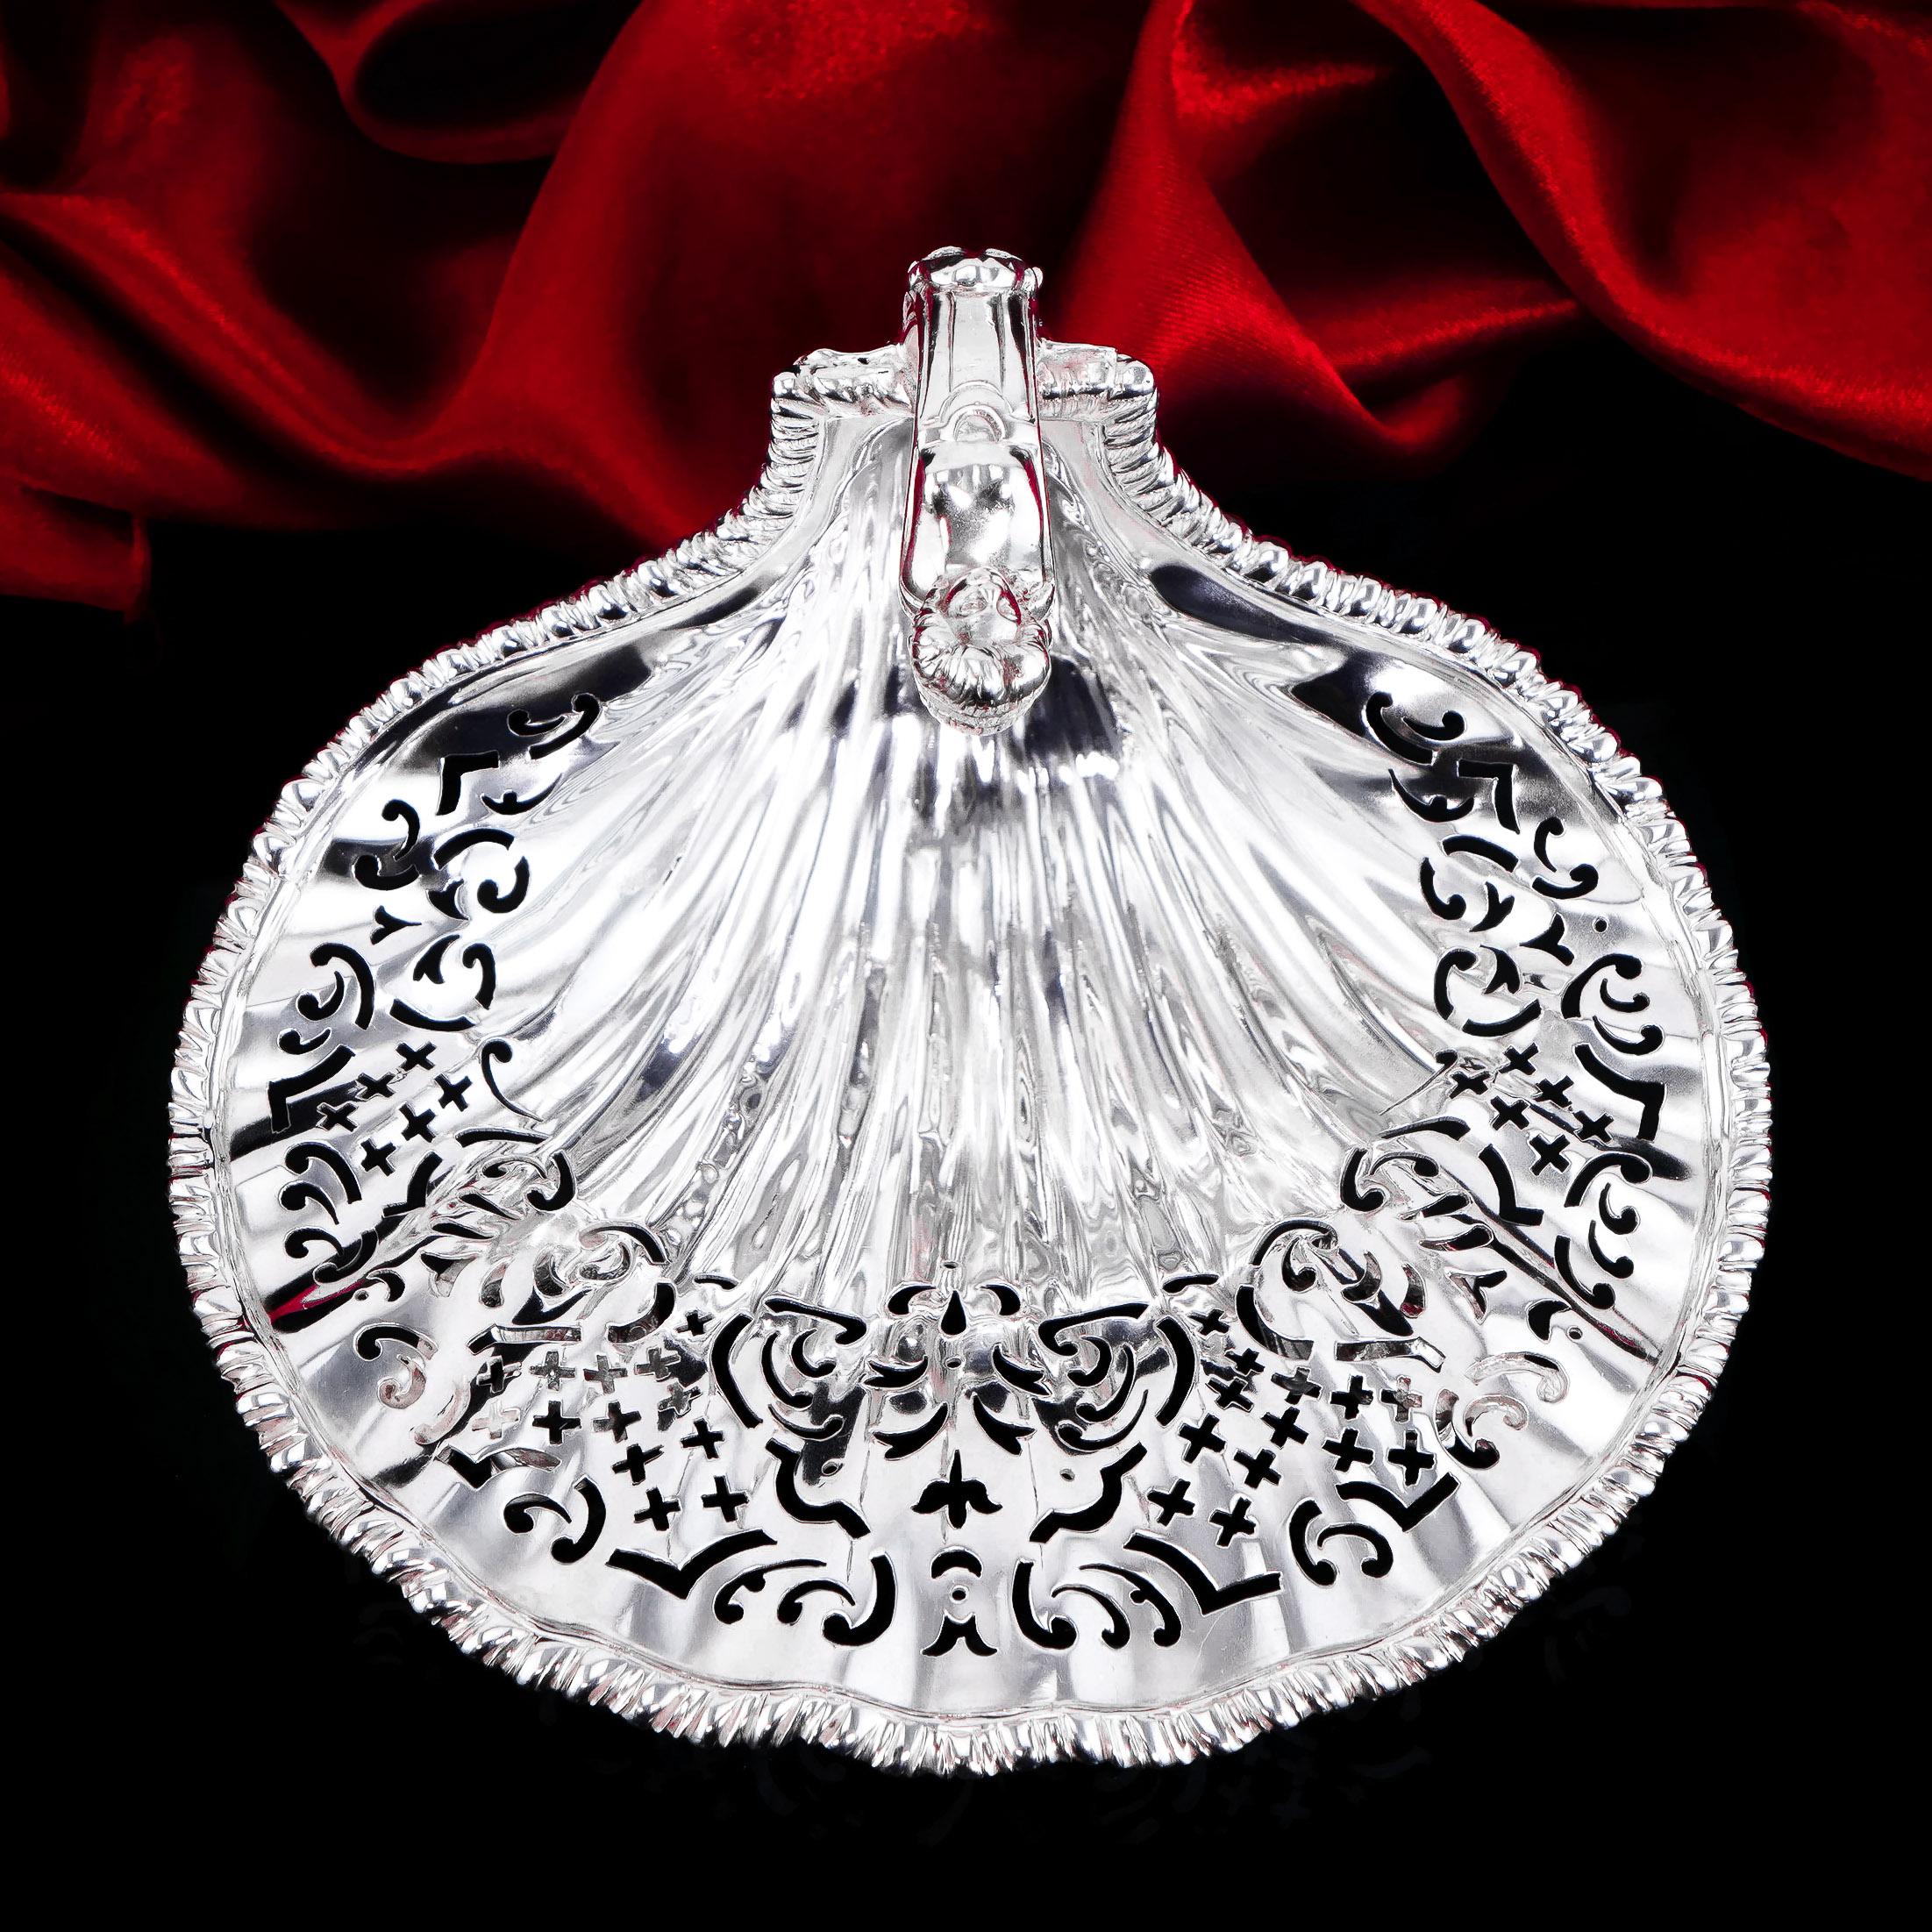 20th Century Antique SterlingSilver Rococo Shell Dish in the Manner of Paul de Lamerie - 1908 For Sale